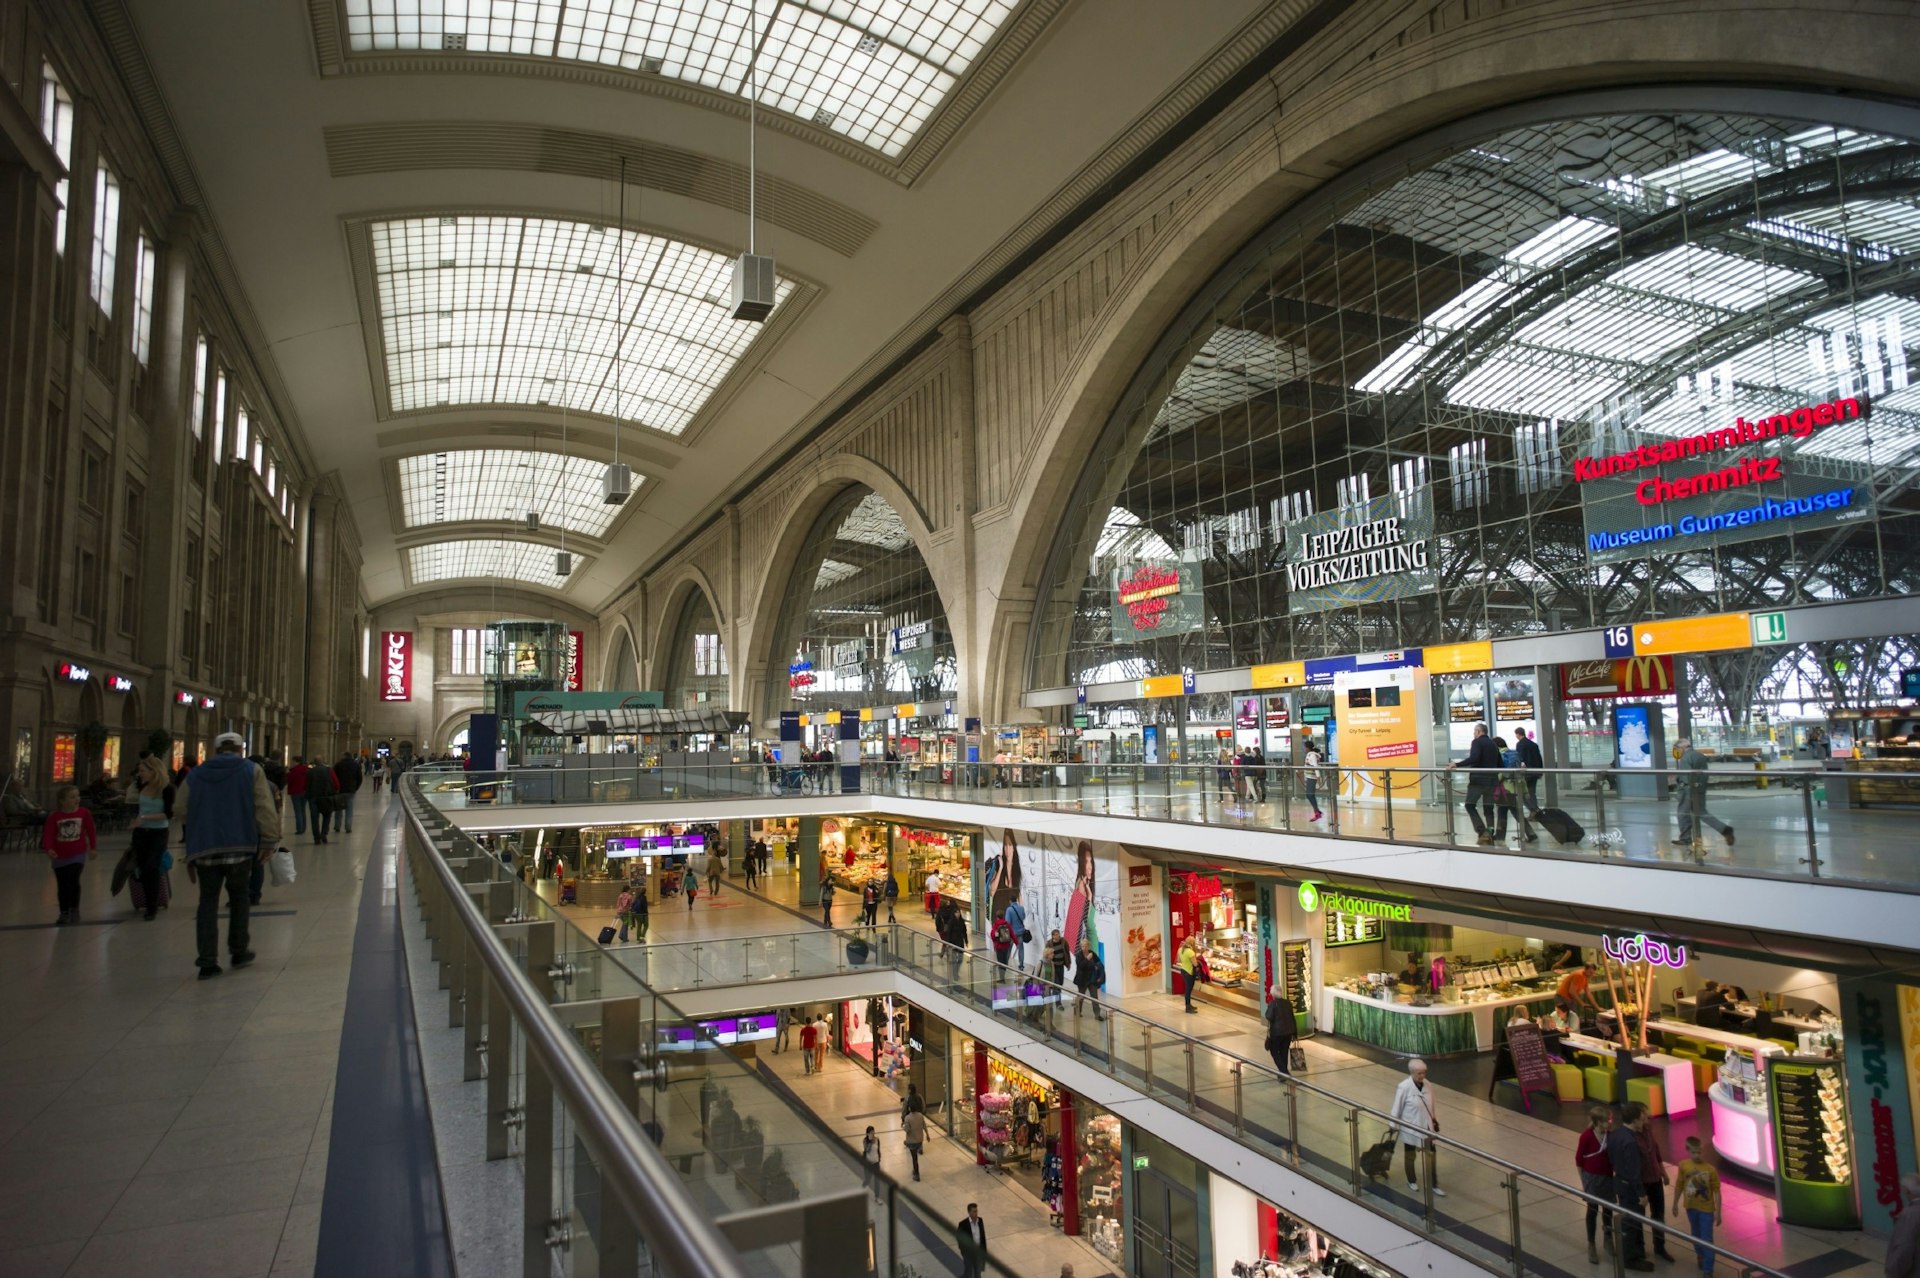 The central train station in Leipzig, Germany